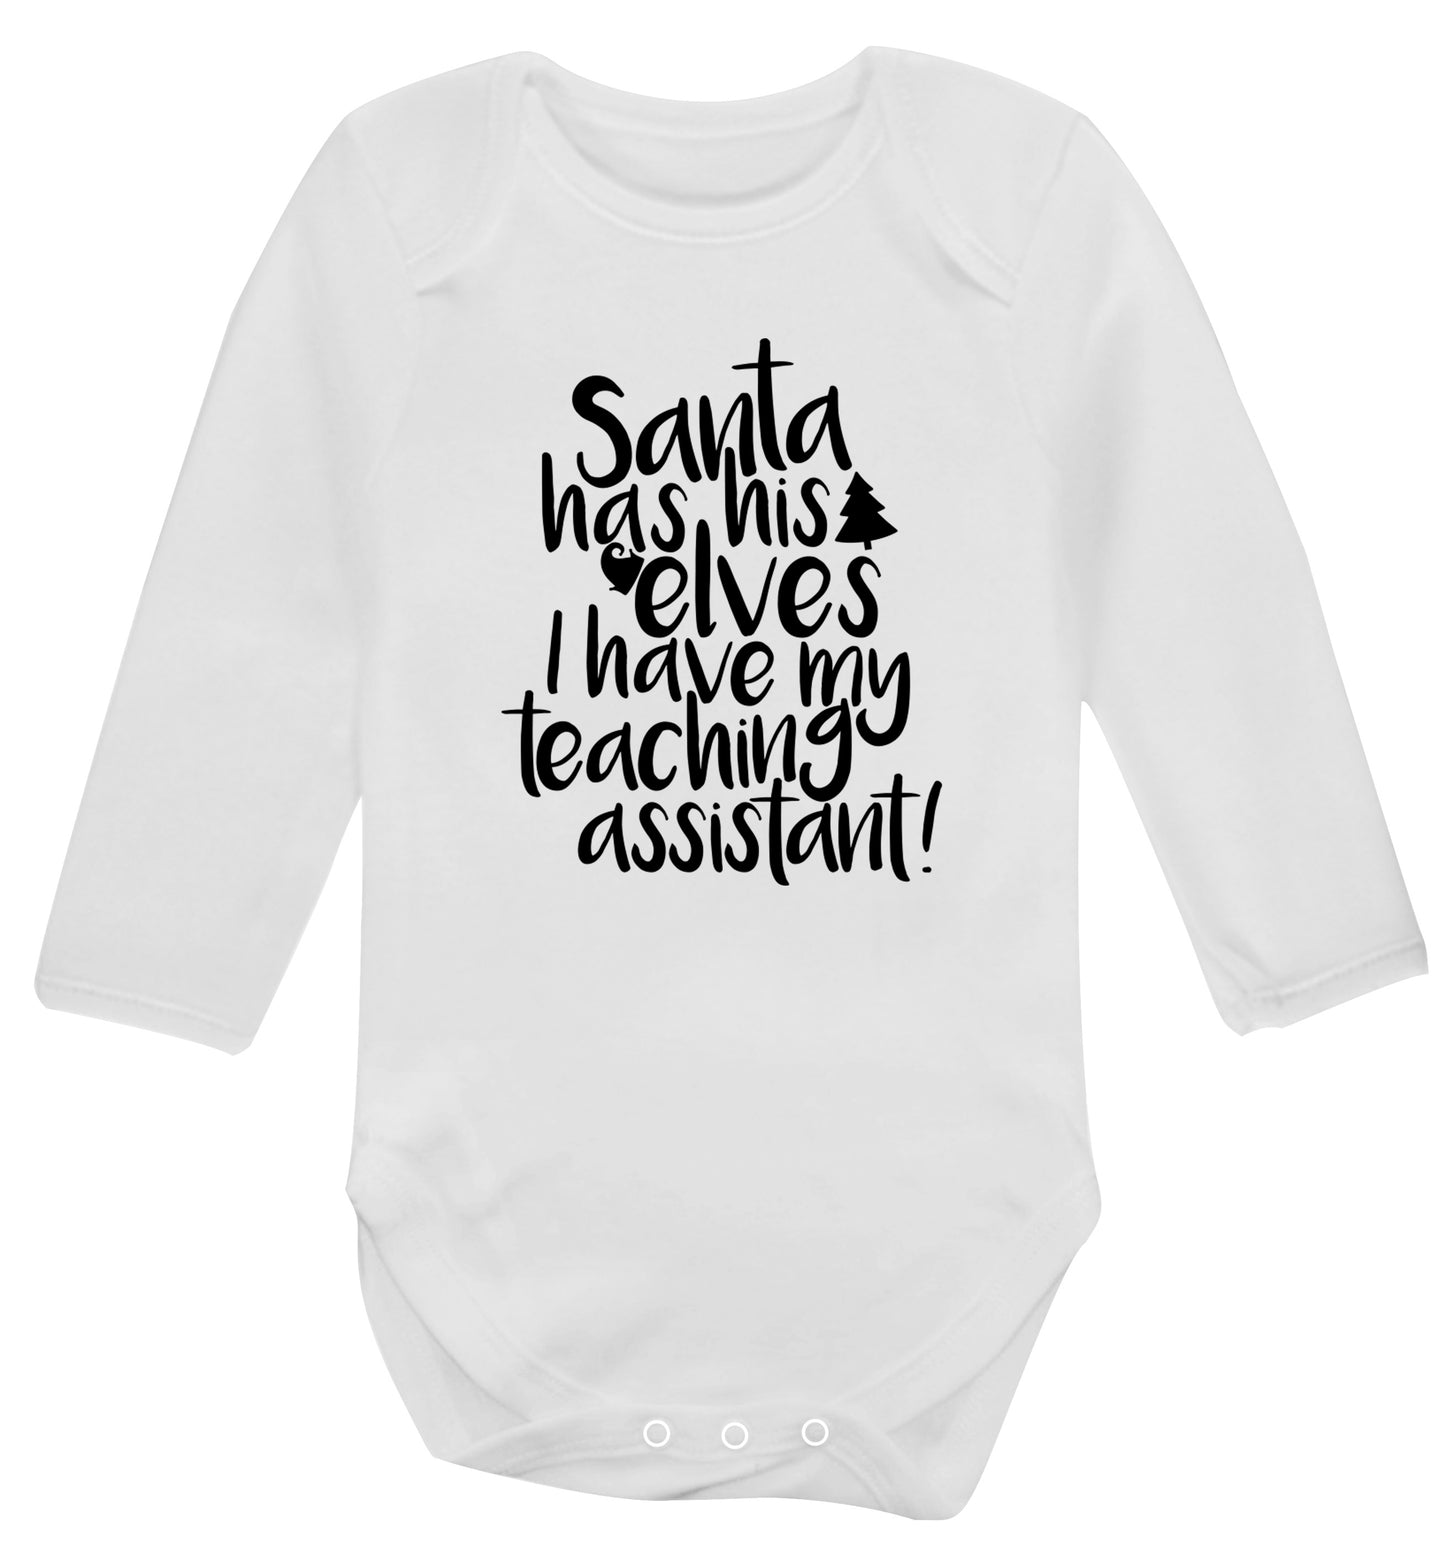 Santa has his elves I have my teaching assistant Baby Vest long sleeved white 6-12 months